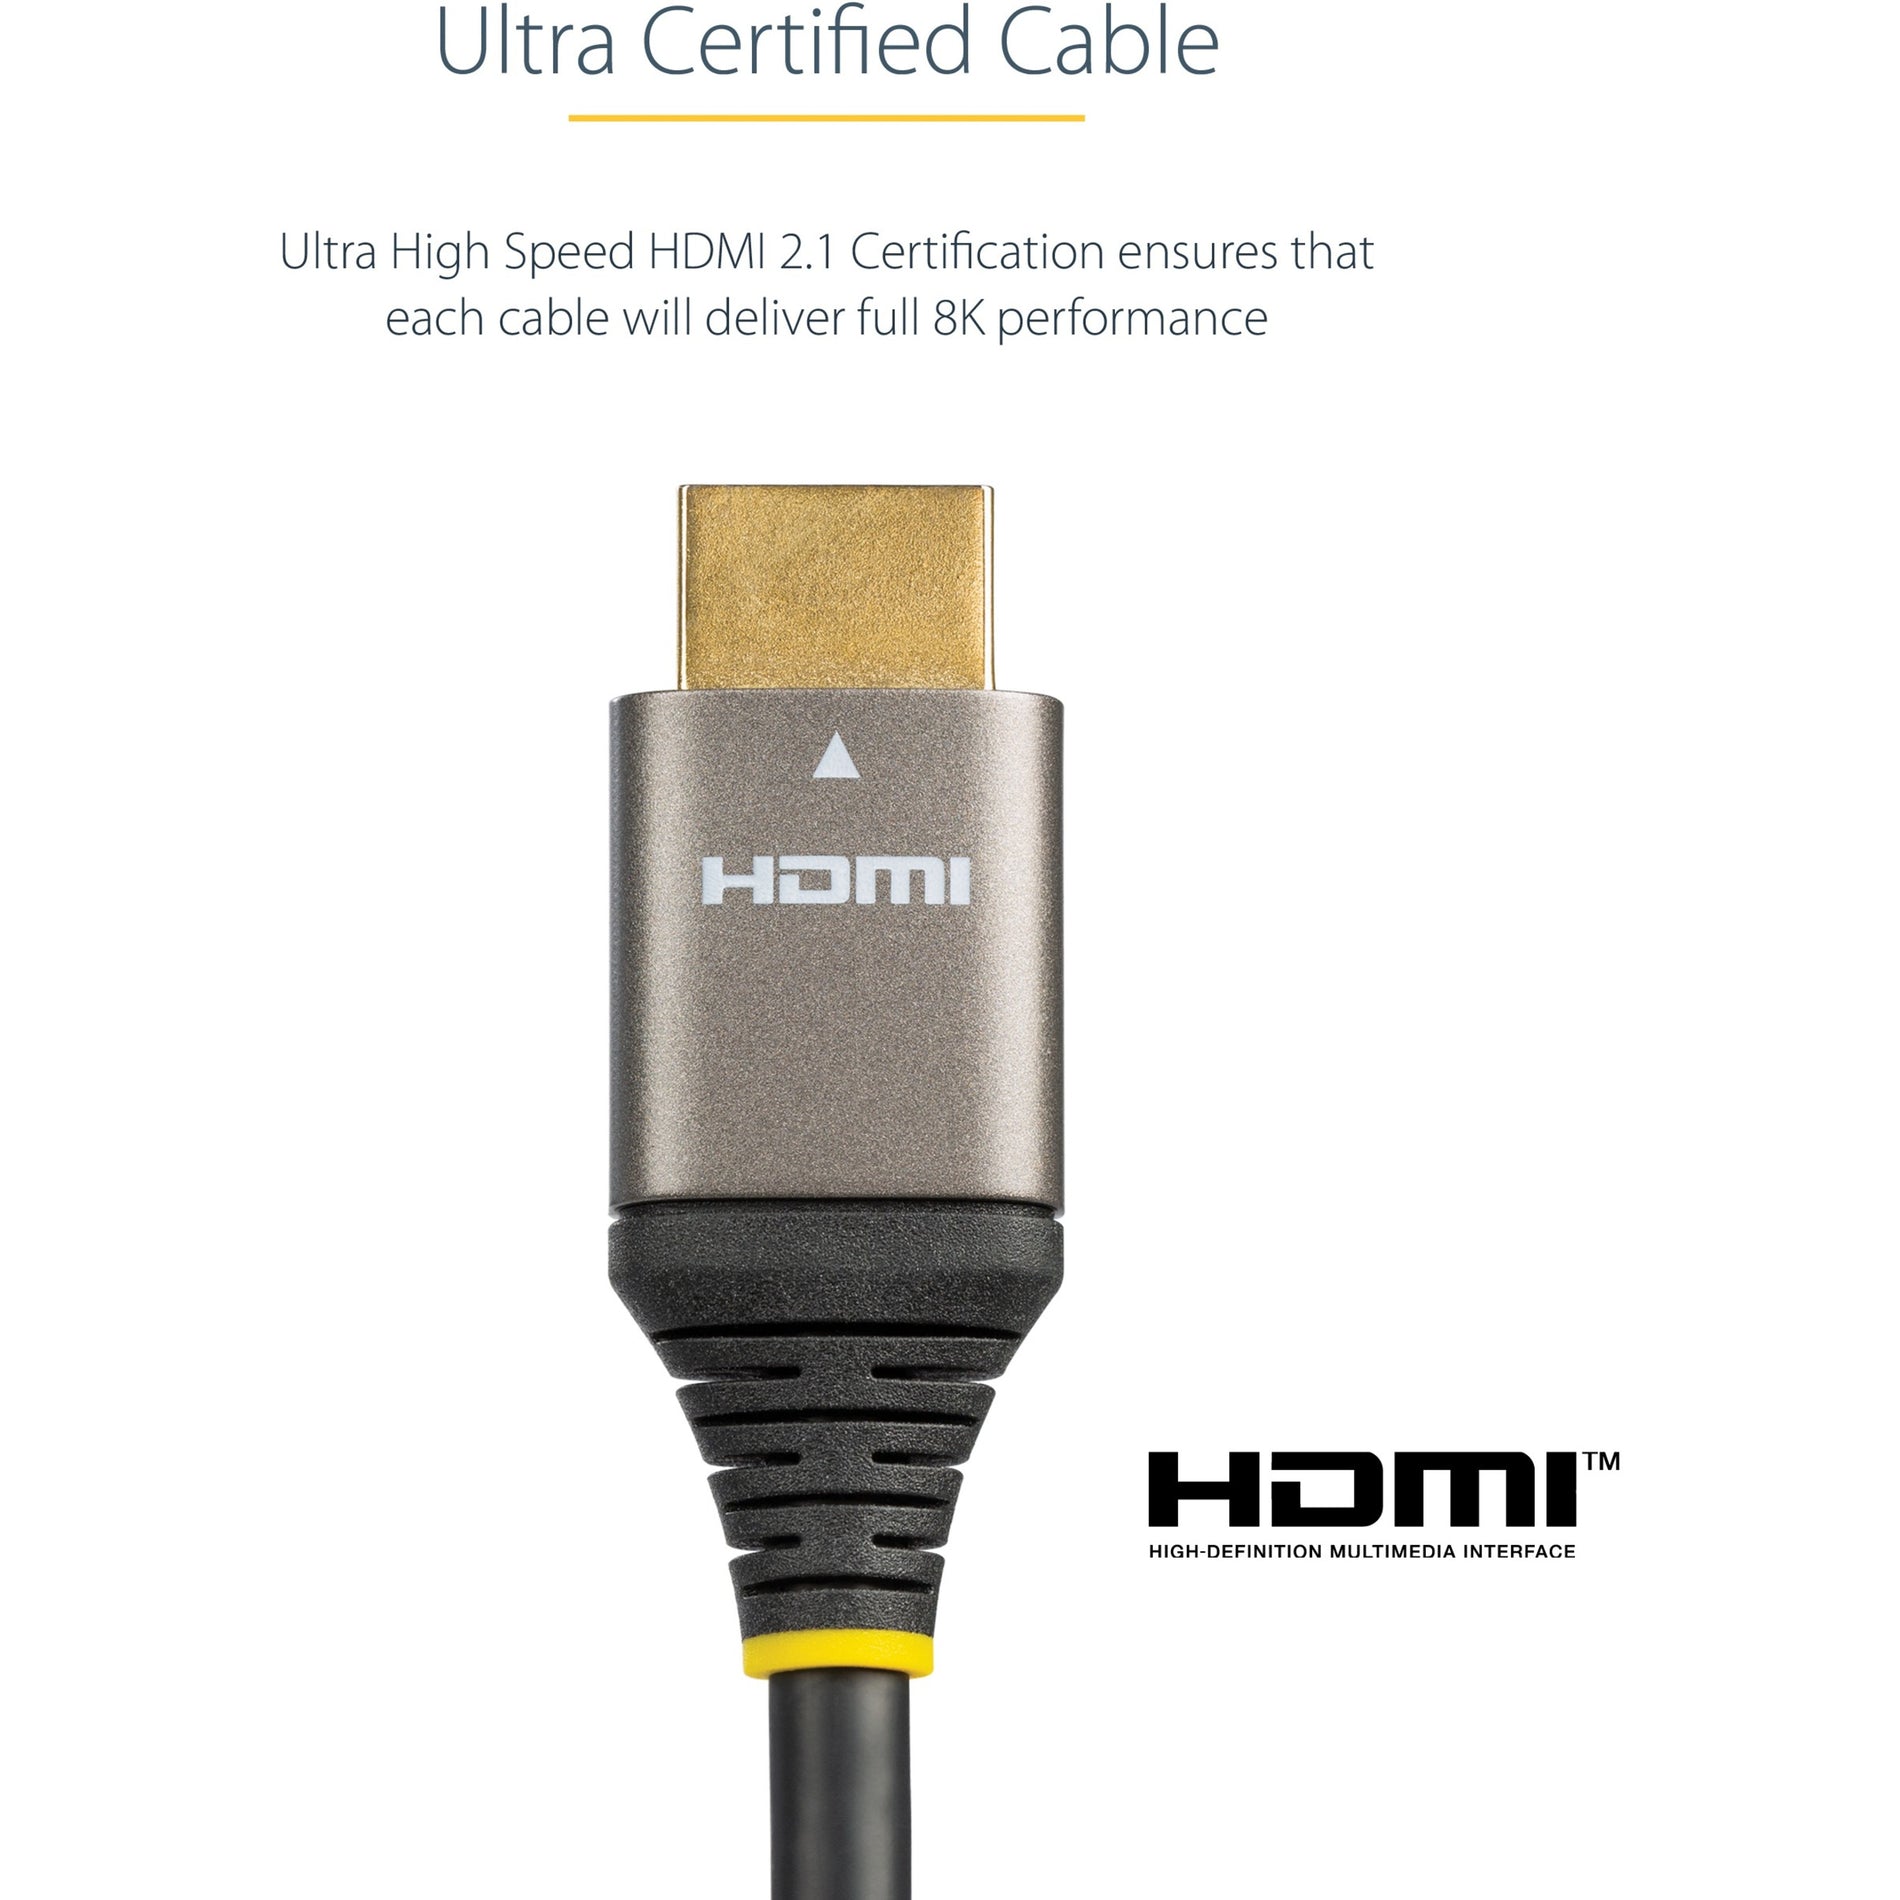 StarTech.com HDMM21V3M Ultra High Speed HDMI Cable, 10ft/3m, Certified 8K 60Hz/4K 120Hz HDR10+, Monitor/Display